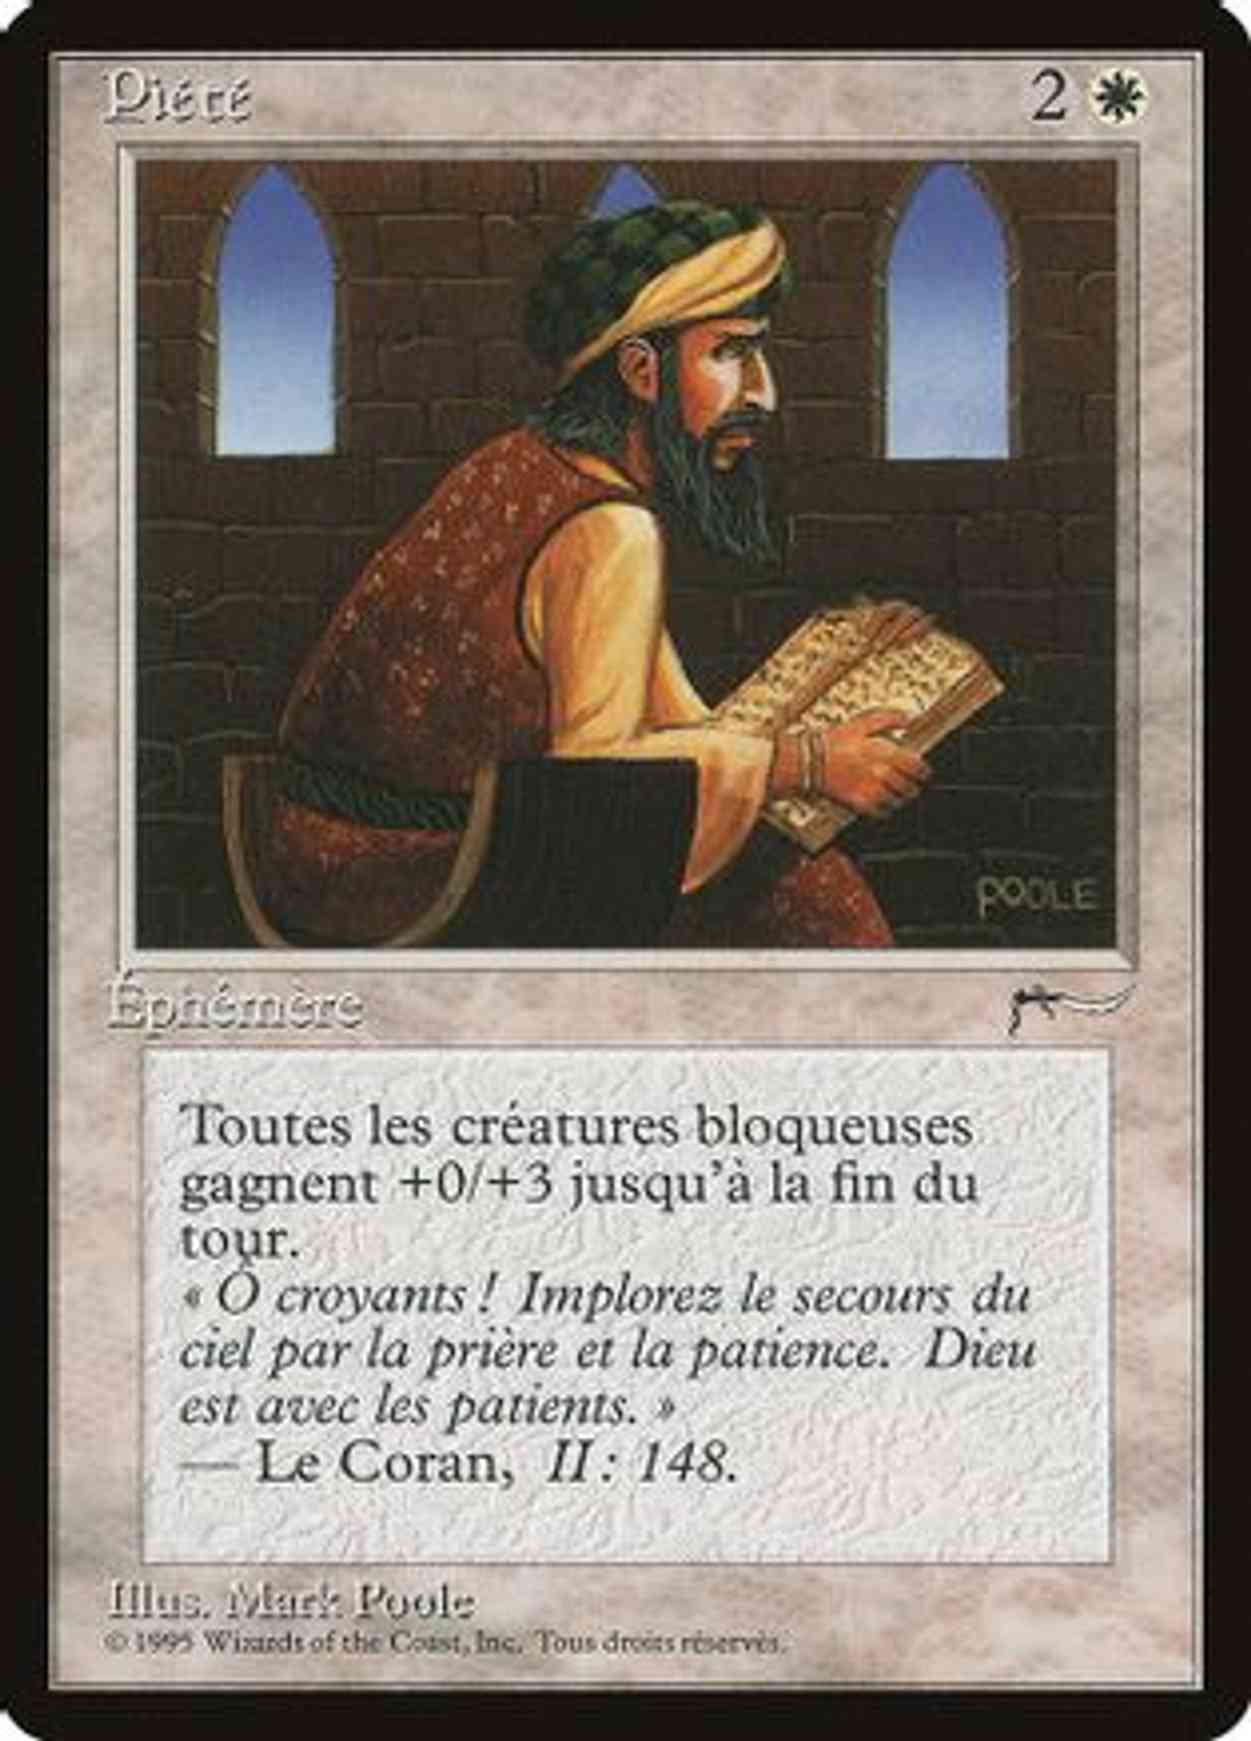 Piety (French) - "Piete" magic card front